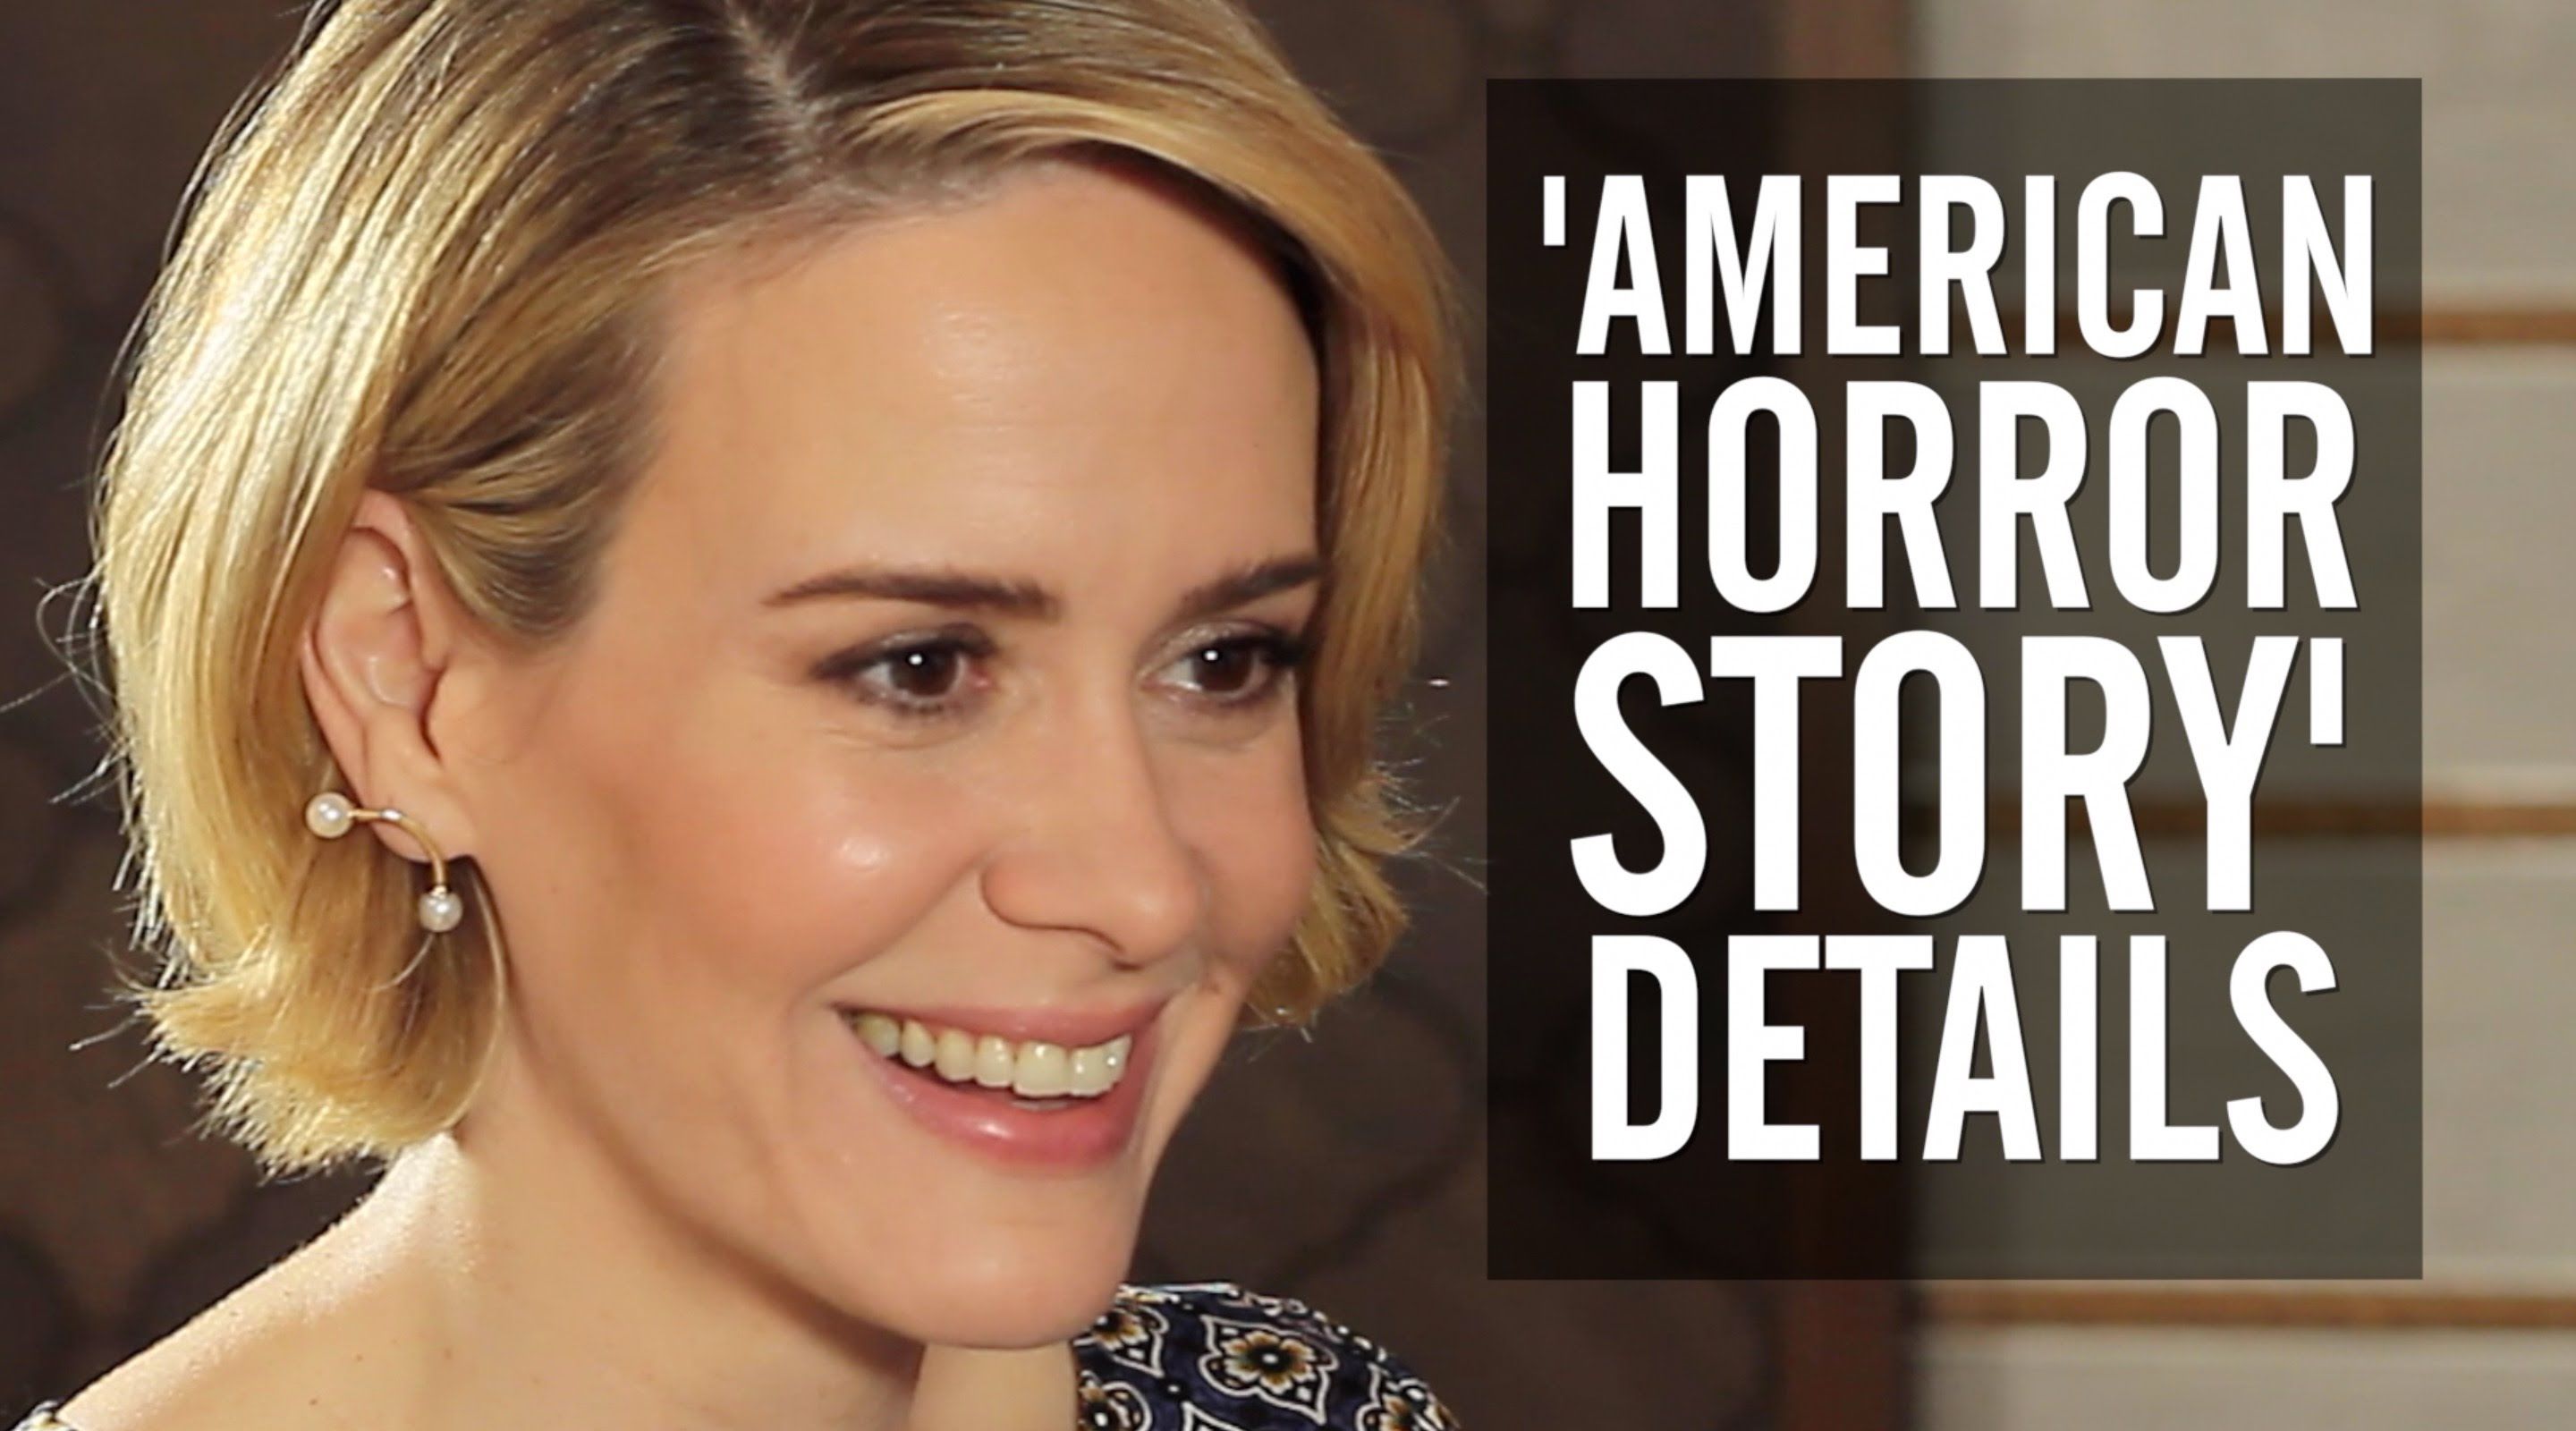 Pictures Of Sarah Paulson